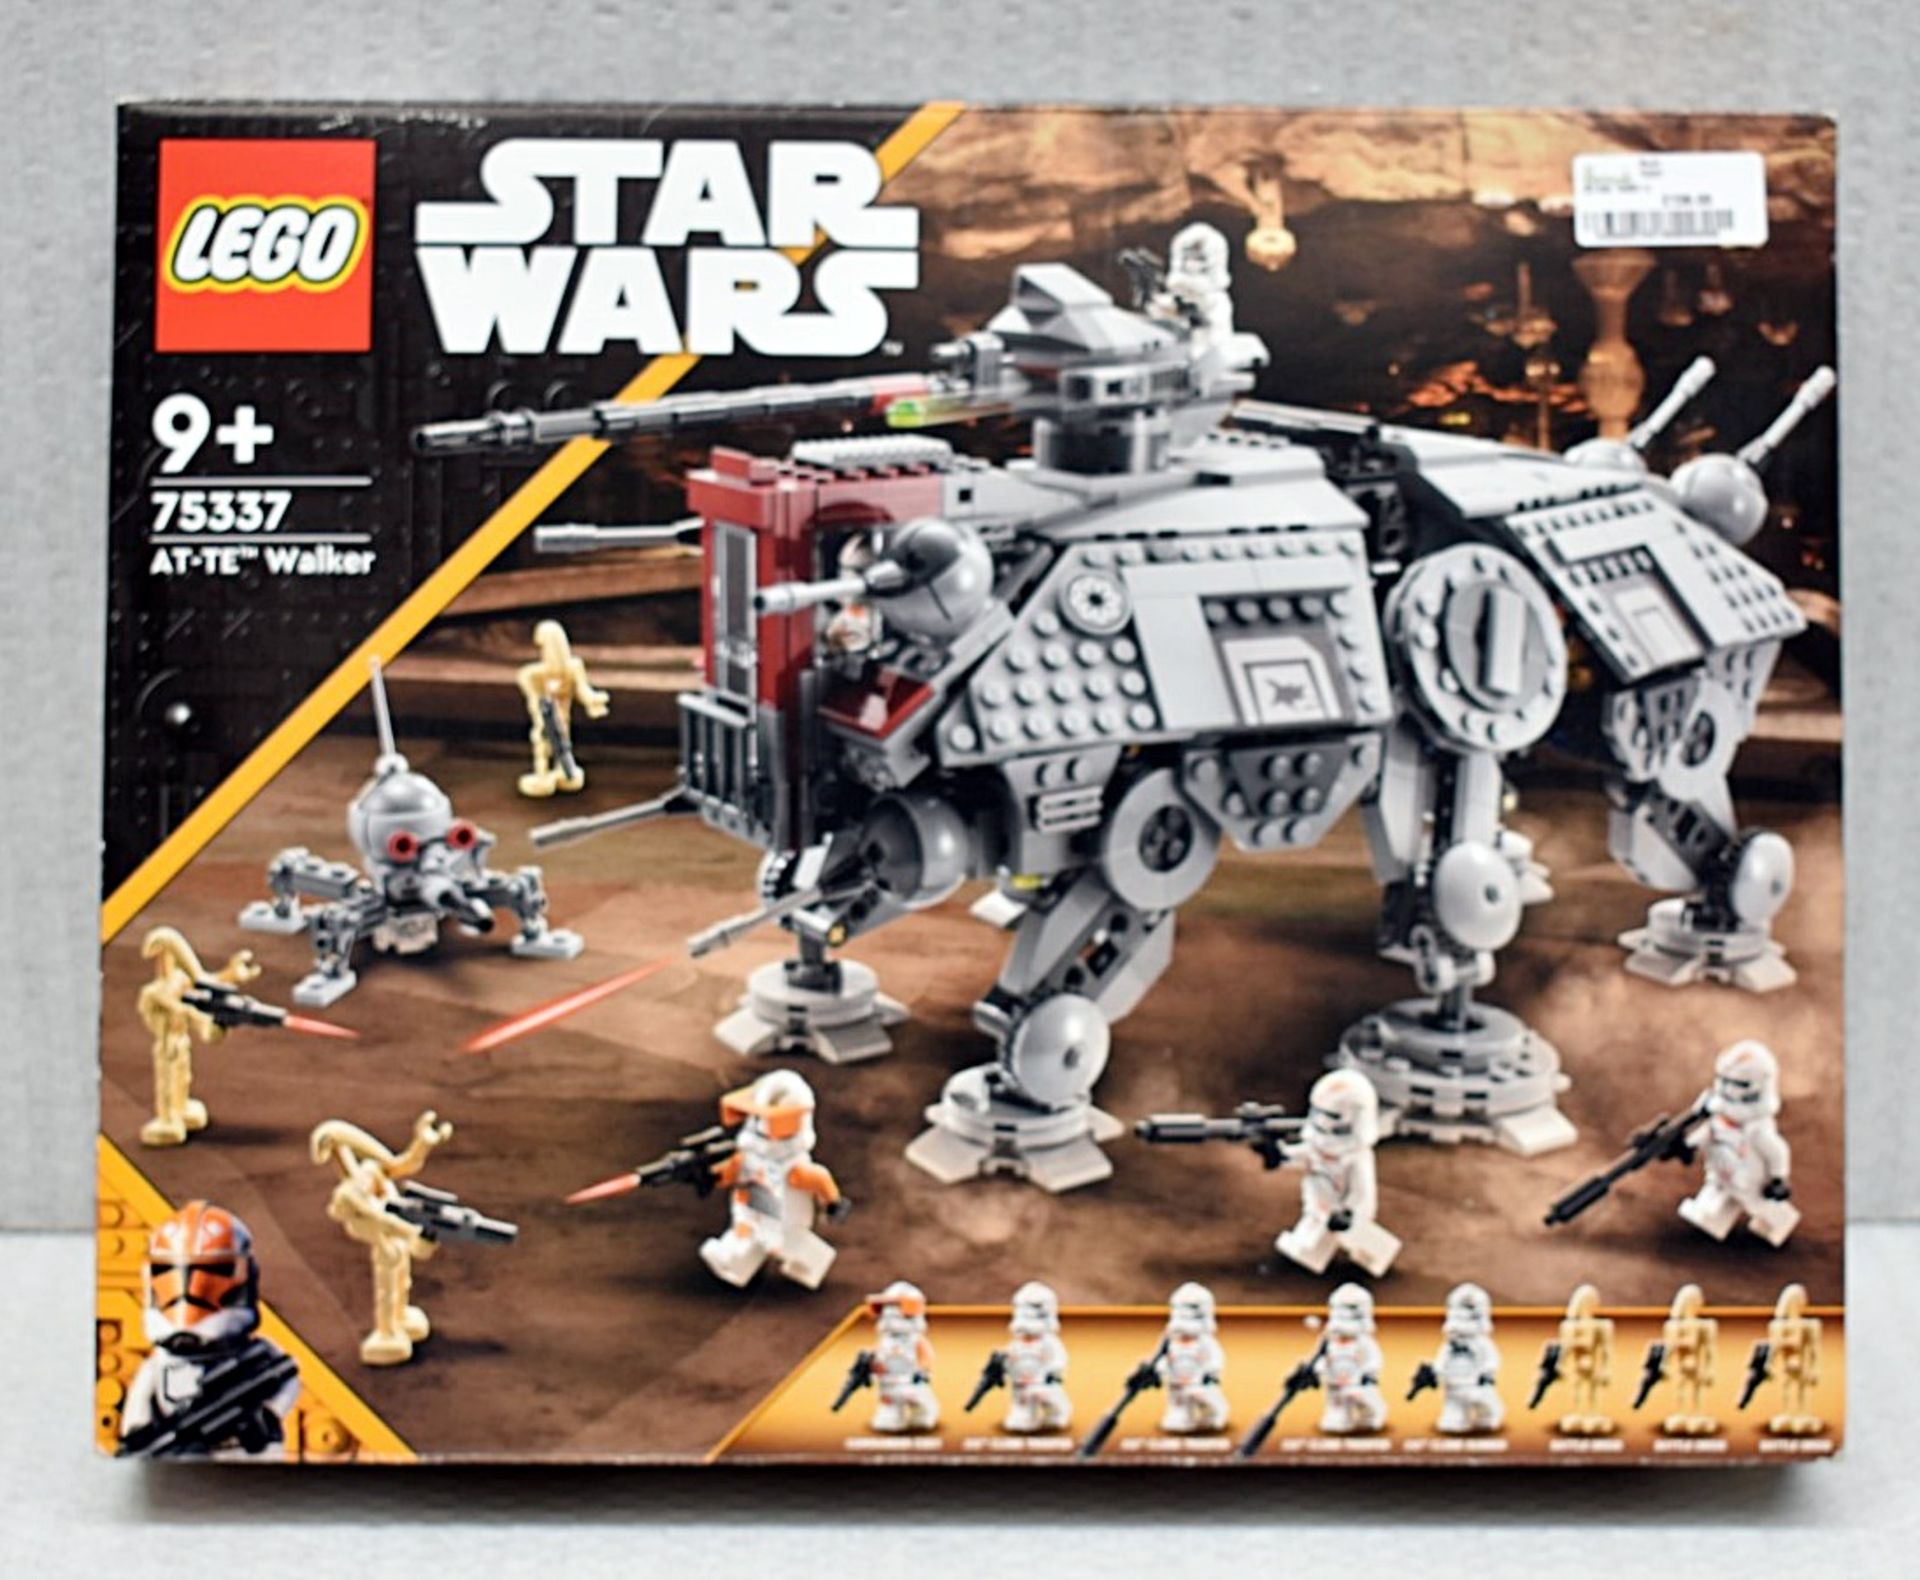 1 x LEGO Star Wars AT-TE Walker Buildable Toy 75337 - Original Price £139.00 - Unused Boxed